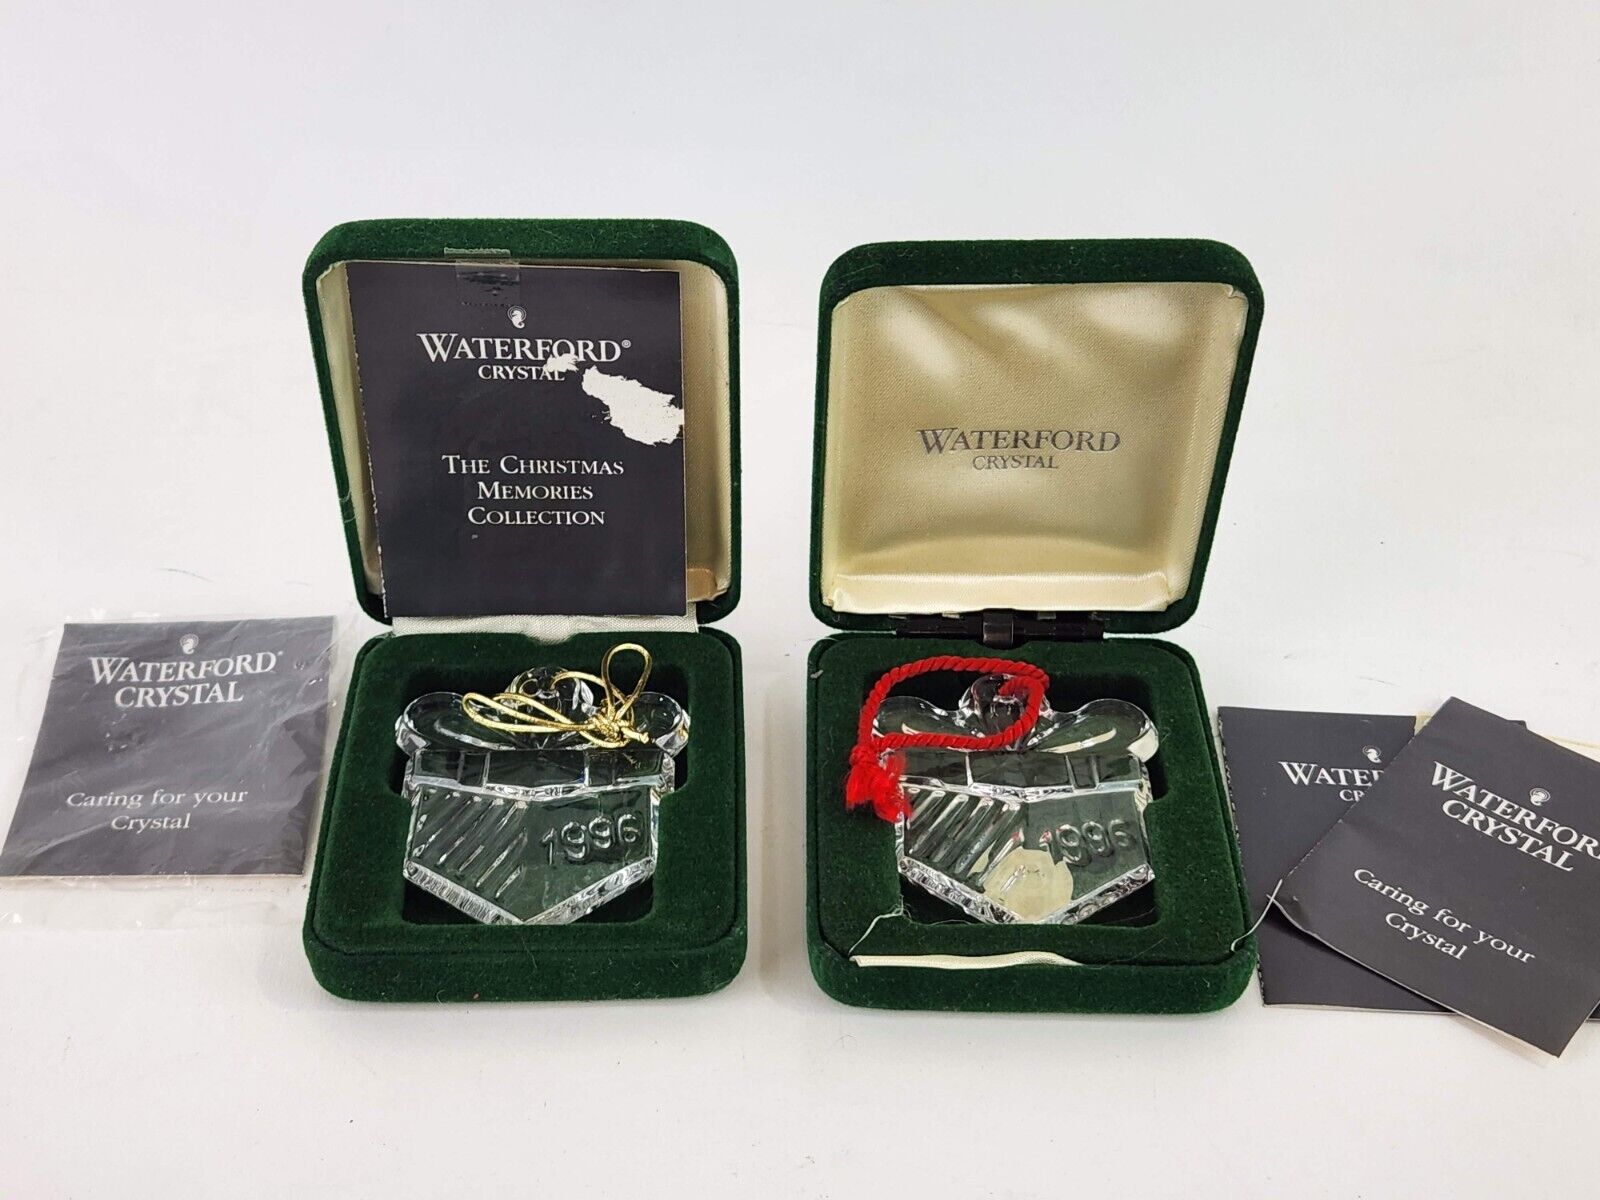 Set of 2 Waterford Crystal Memories Ornament Collection Gift 1996 Gift Box